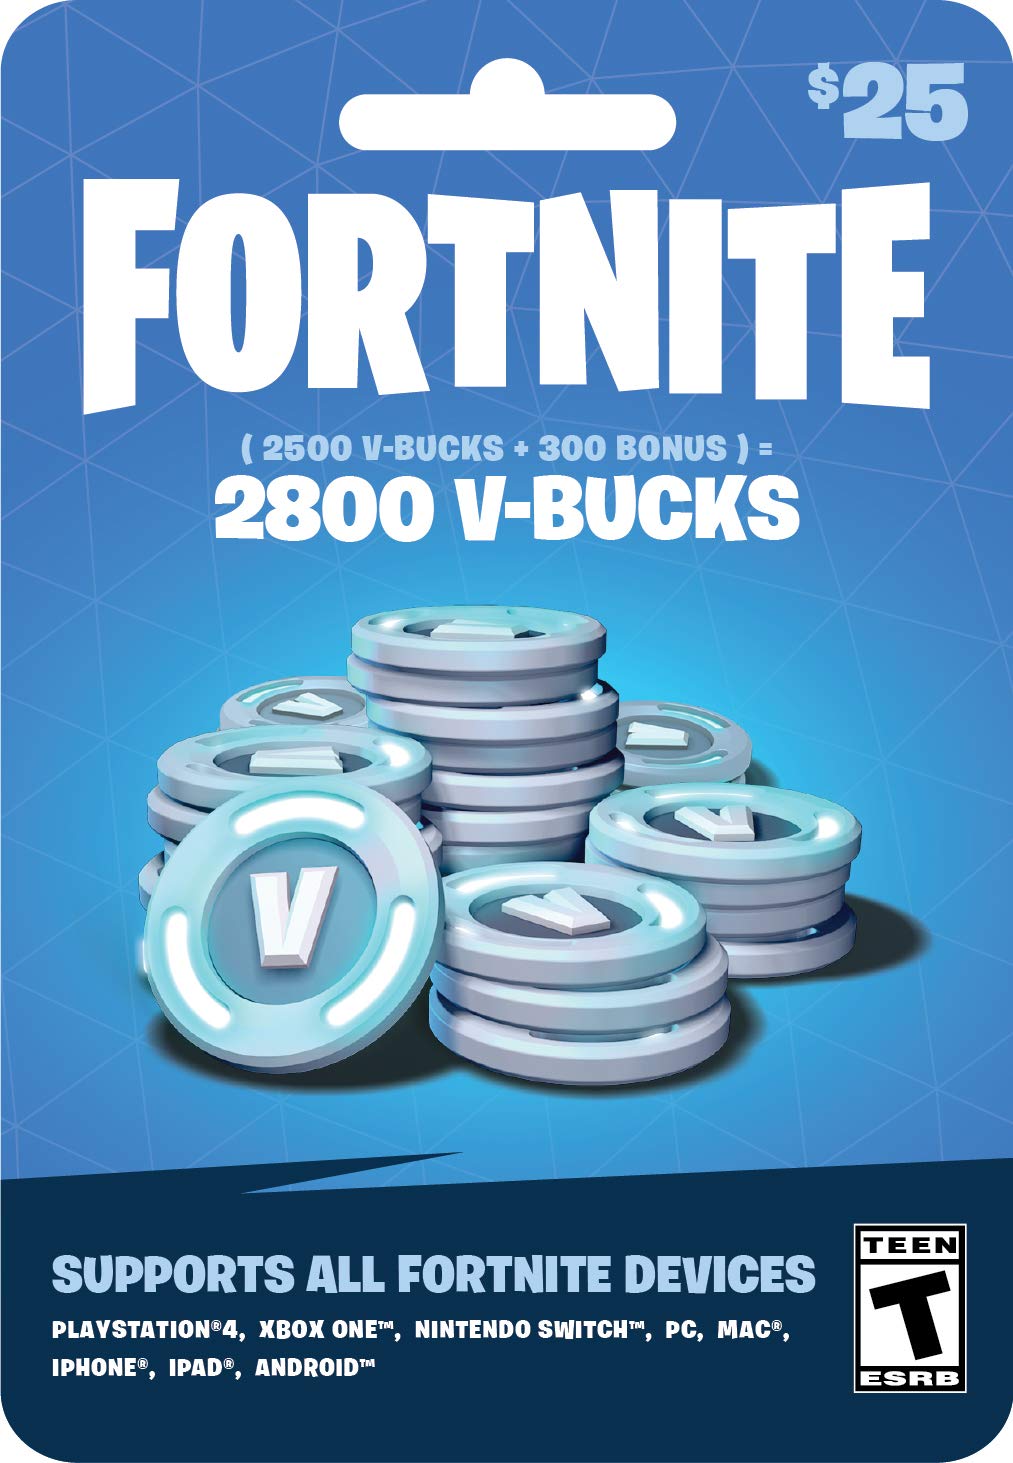 can you buy v bucks with a xbox gift card